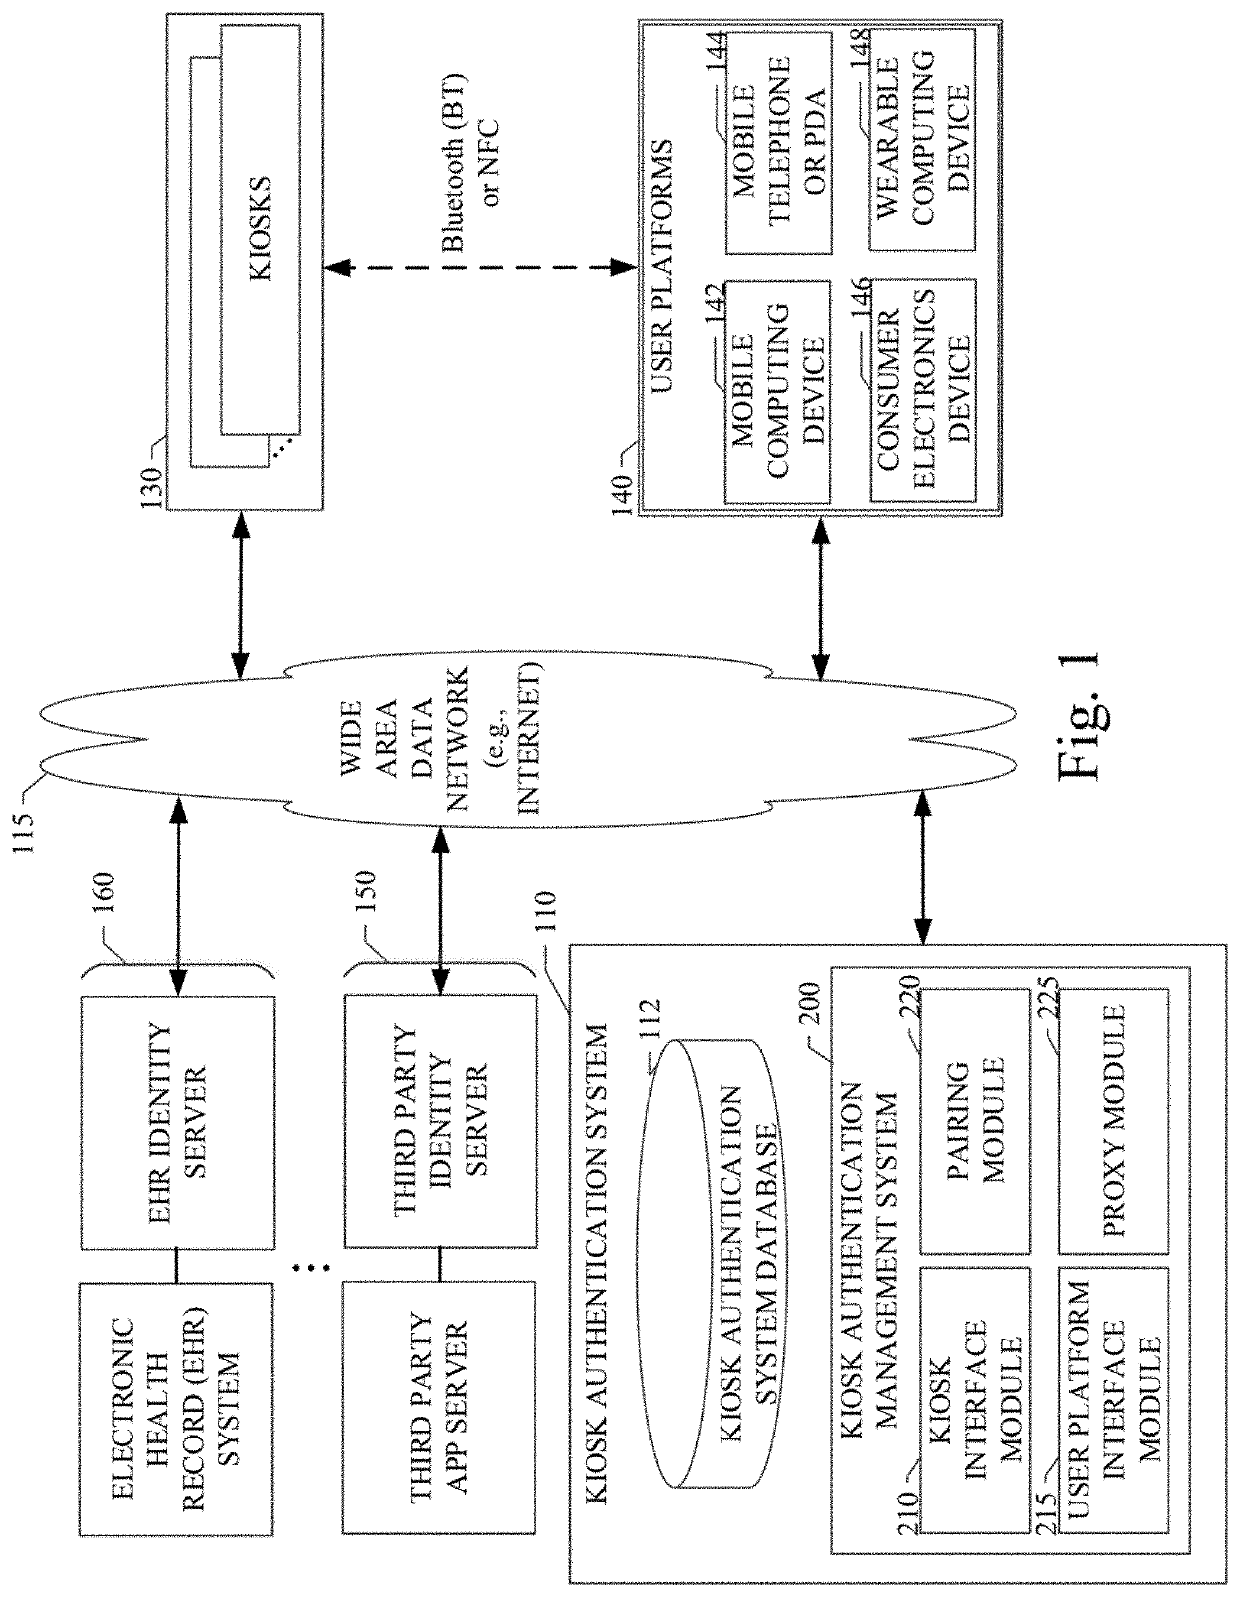 System and method for user authentication at a kiosk from a mobile device